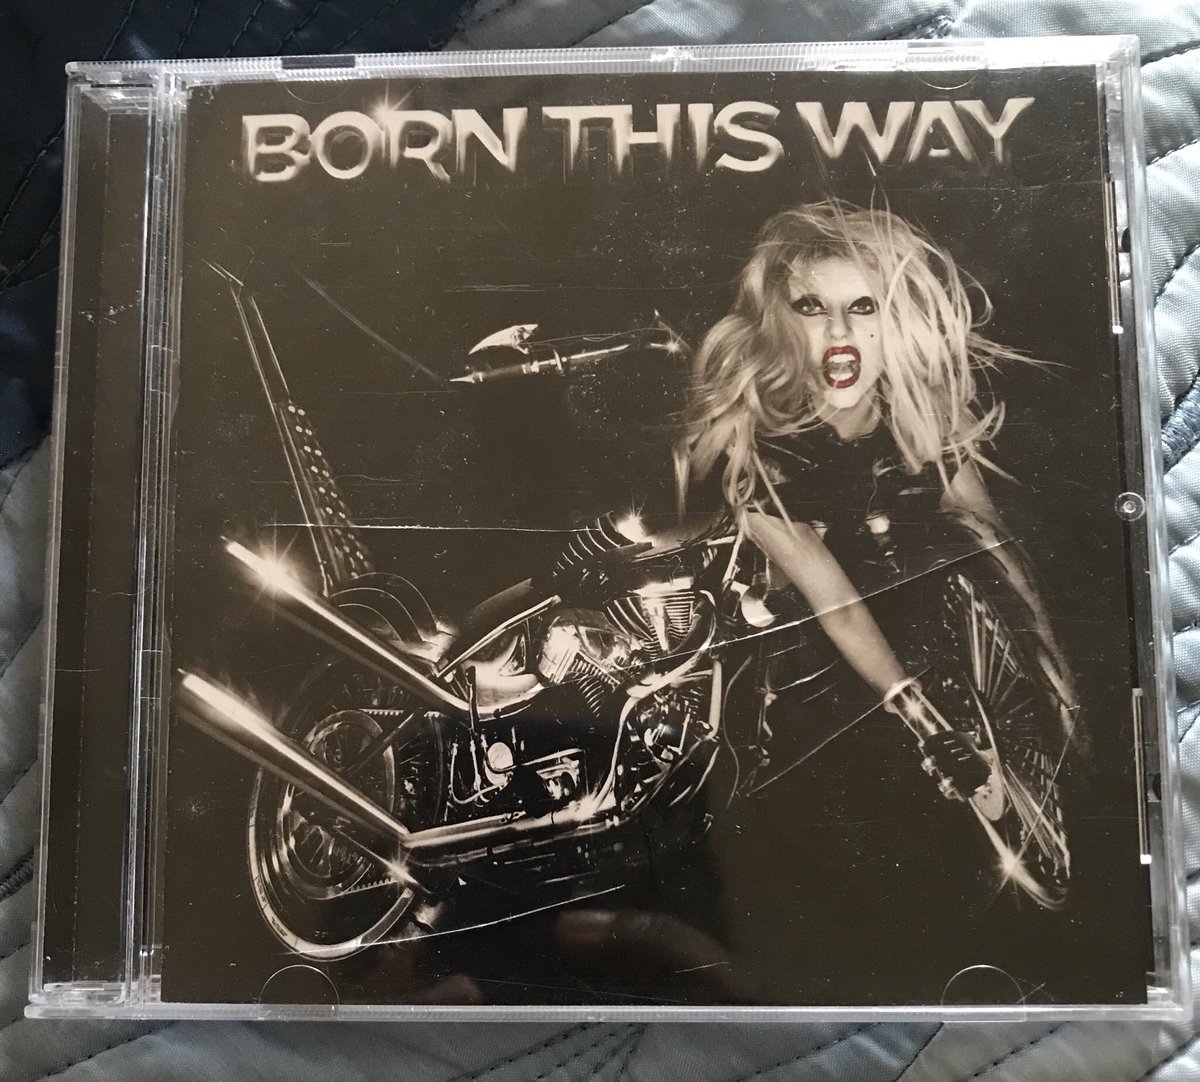 #3 : Born This Way by Lady Gaga. Need I say more? Iconic. Next question